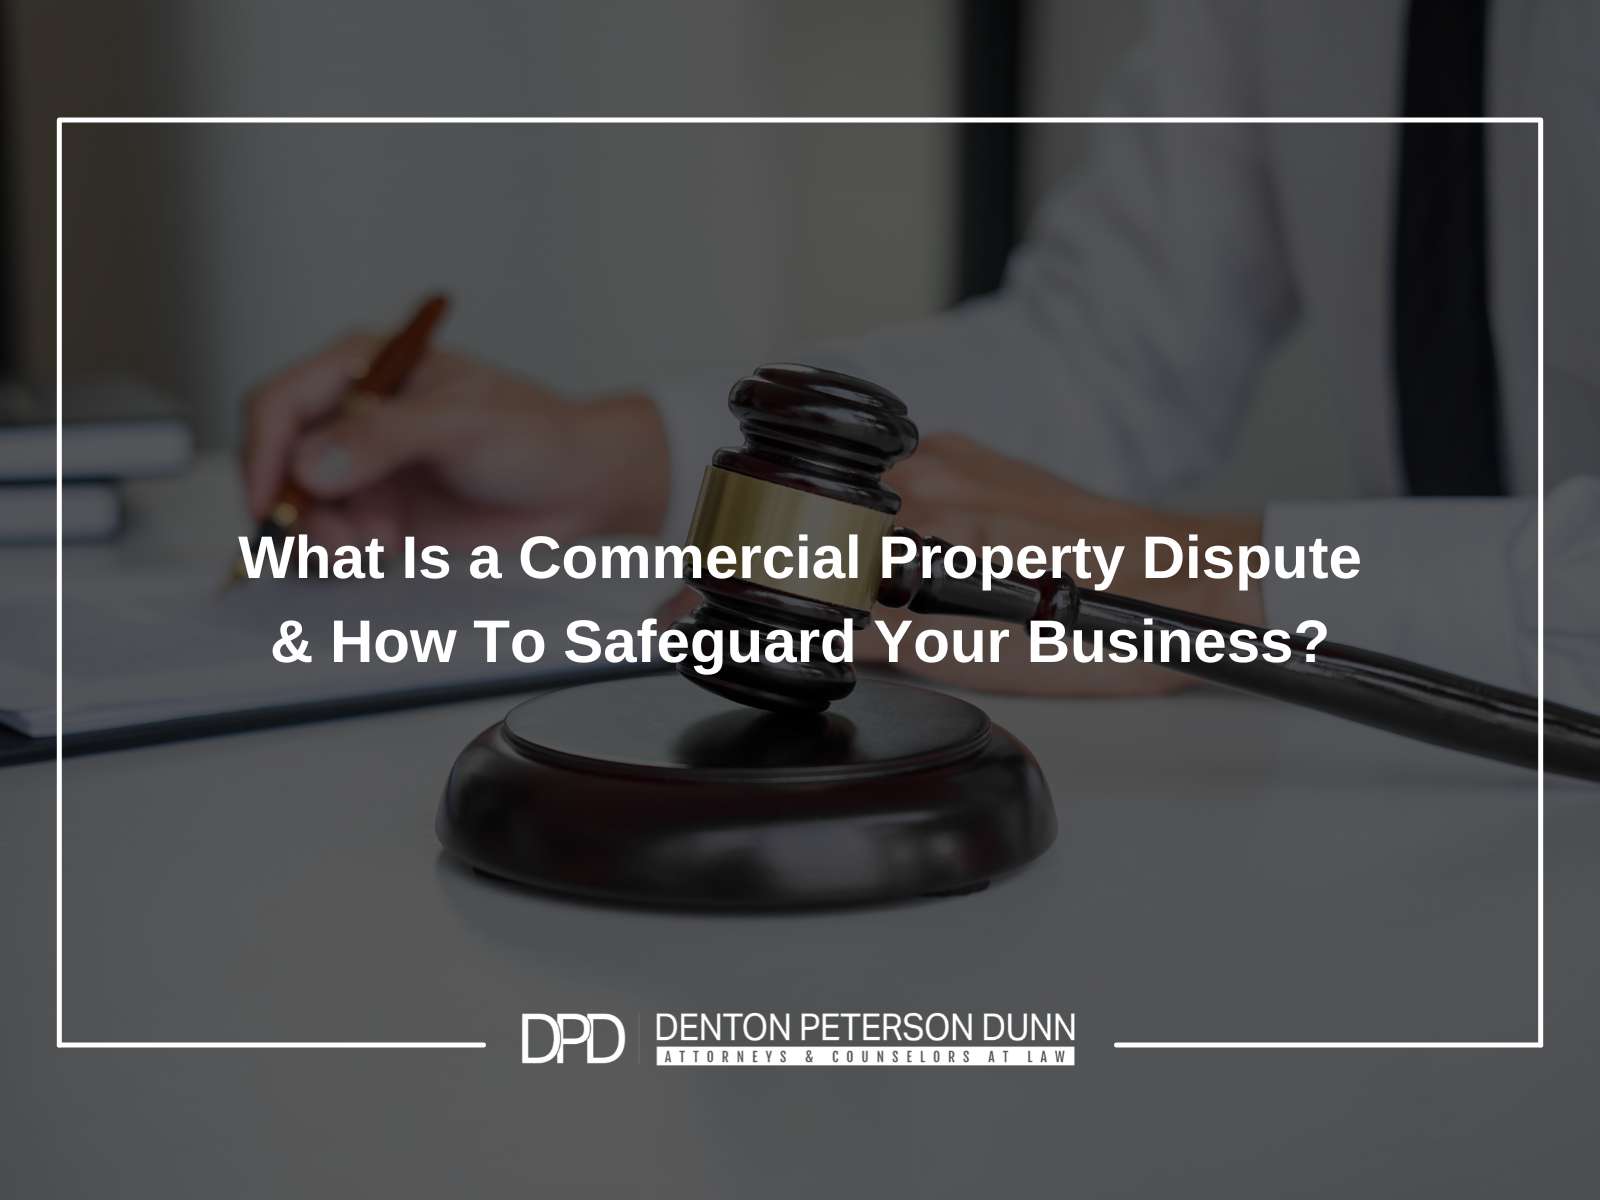 What Is a Commercial Property Dispute & How To Safeguard Your Business?